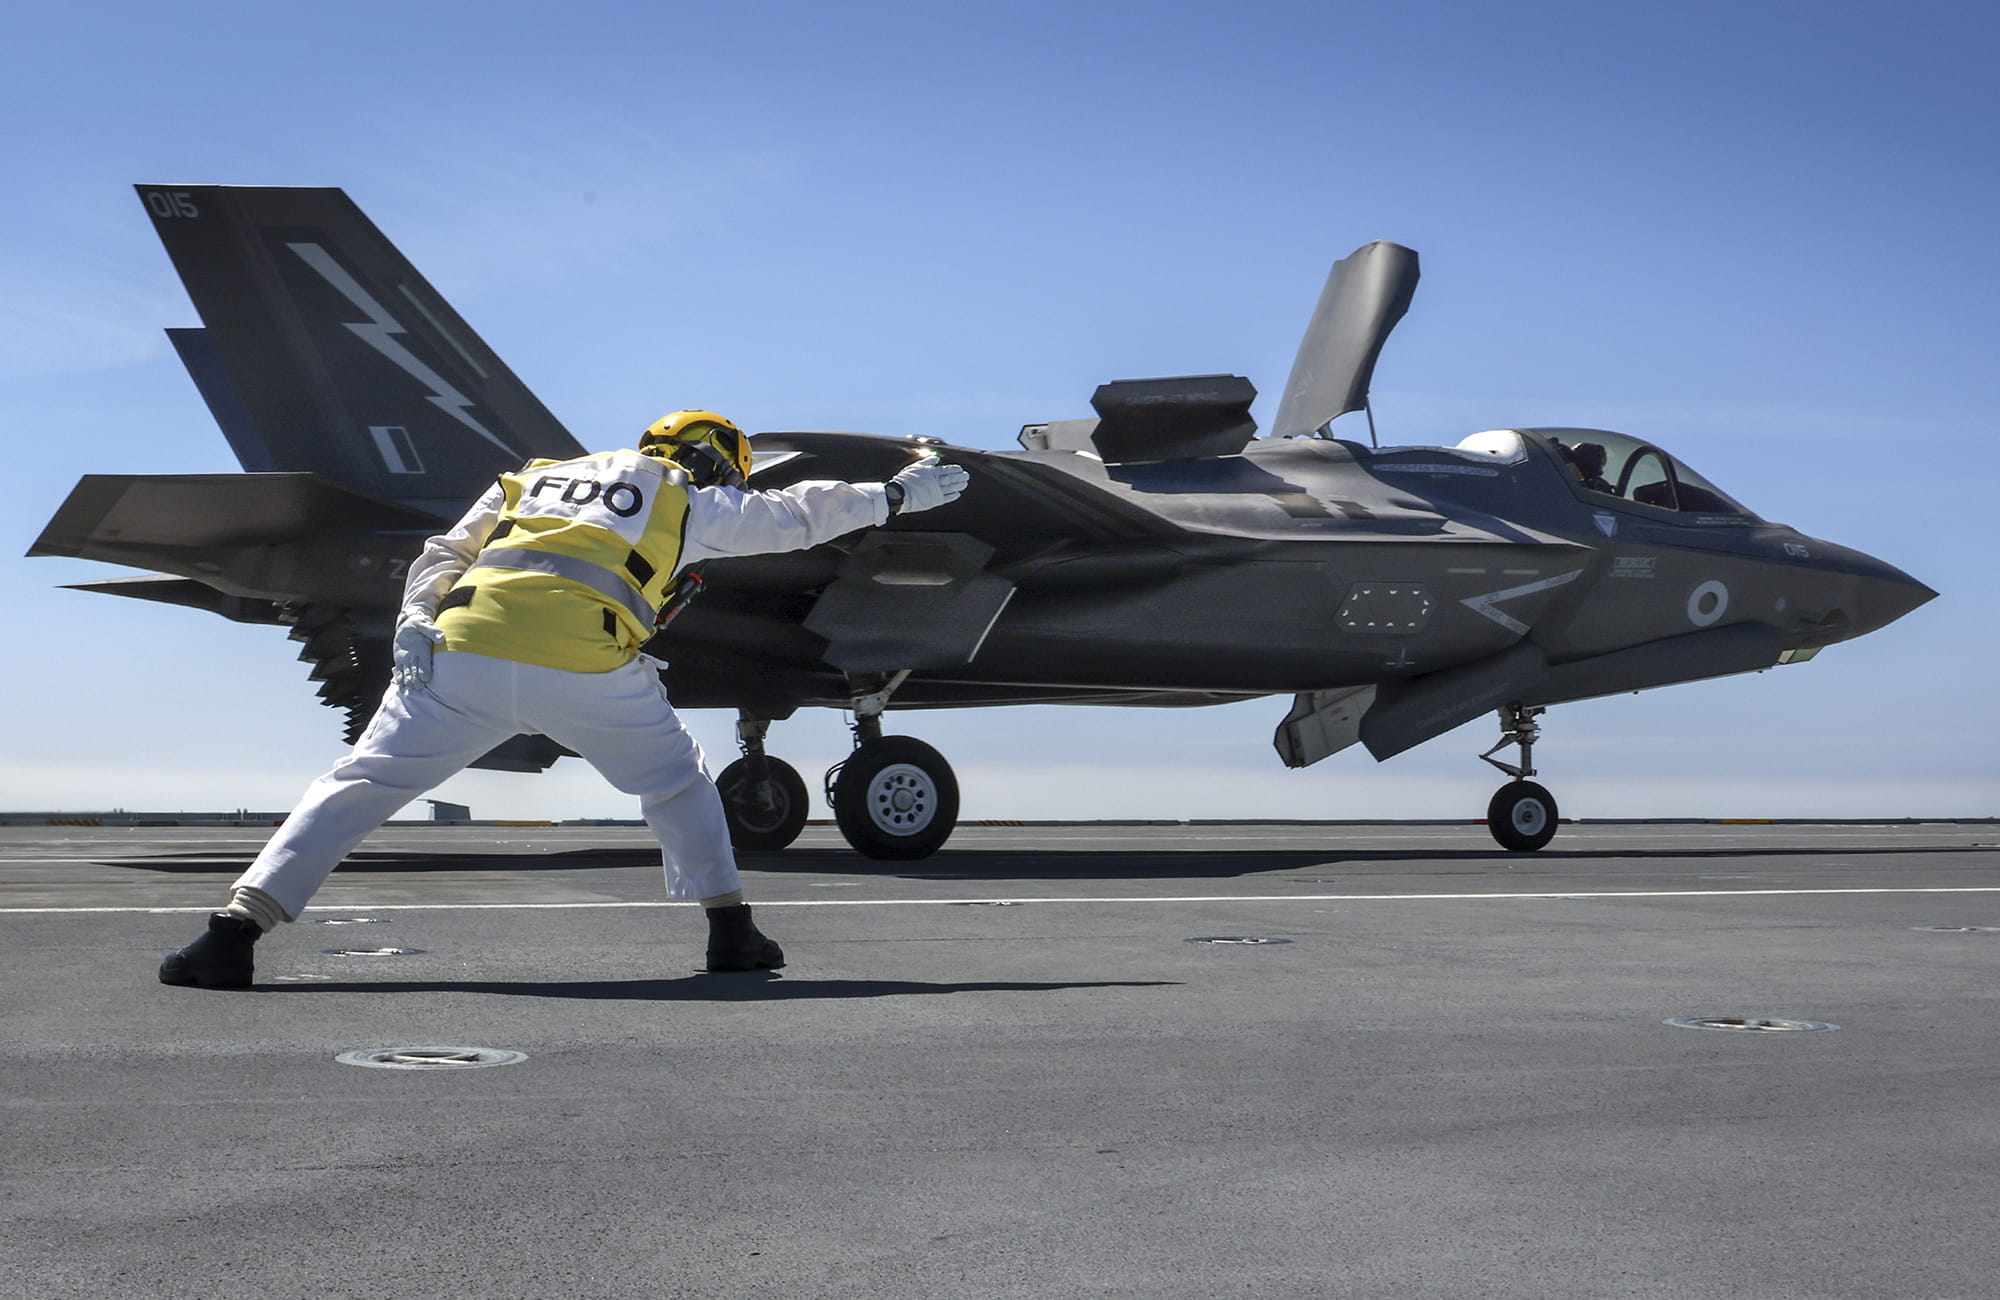 Flight deck officer onboard the HMS Prince of Wales launches F-35 Lightning